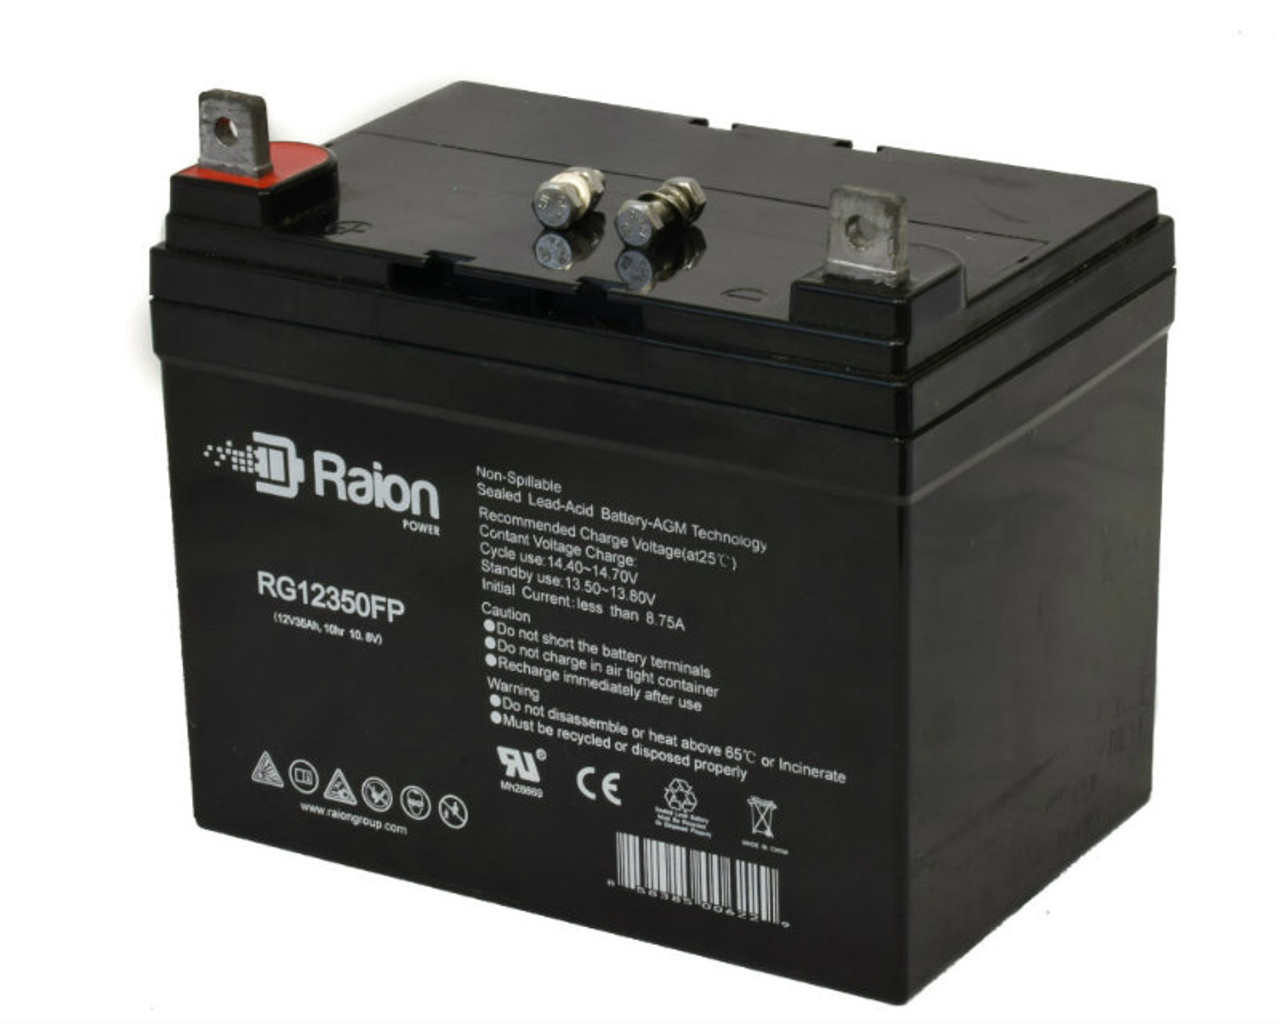 Raion Power Replacement 12V 35Ah RG12350FP Mobility Scooter Battery for Invacare Power 9000 (16in. or wider)